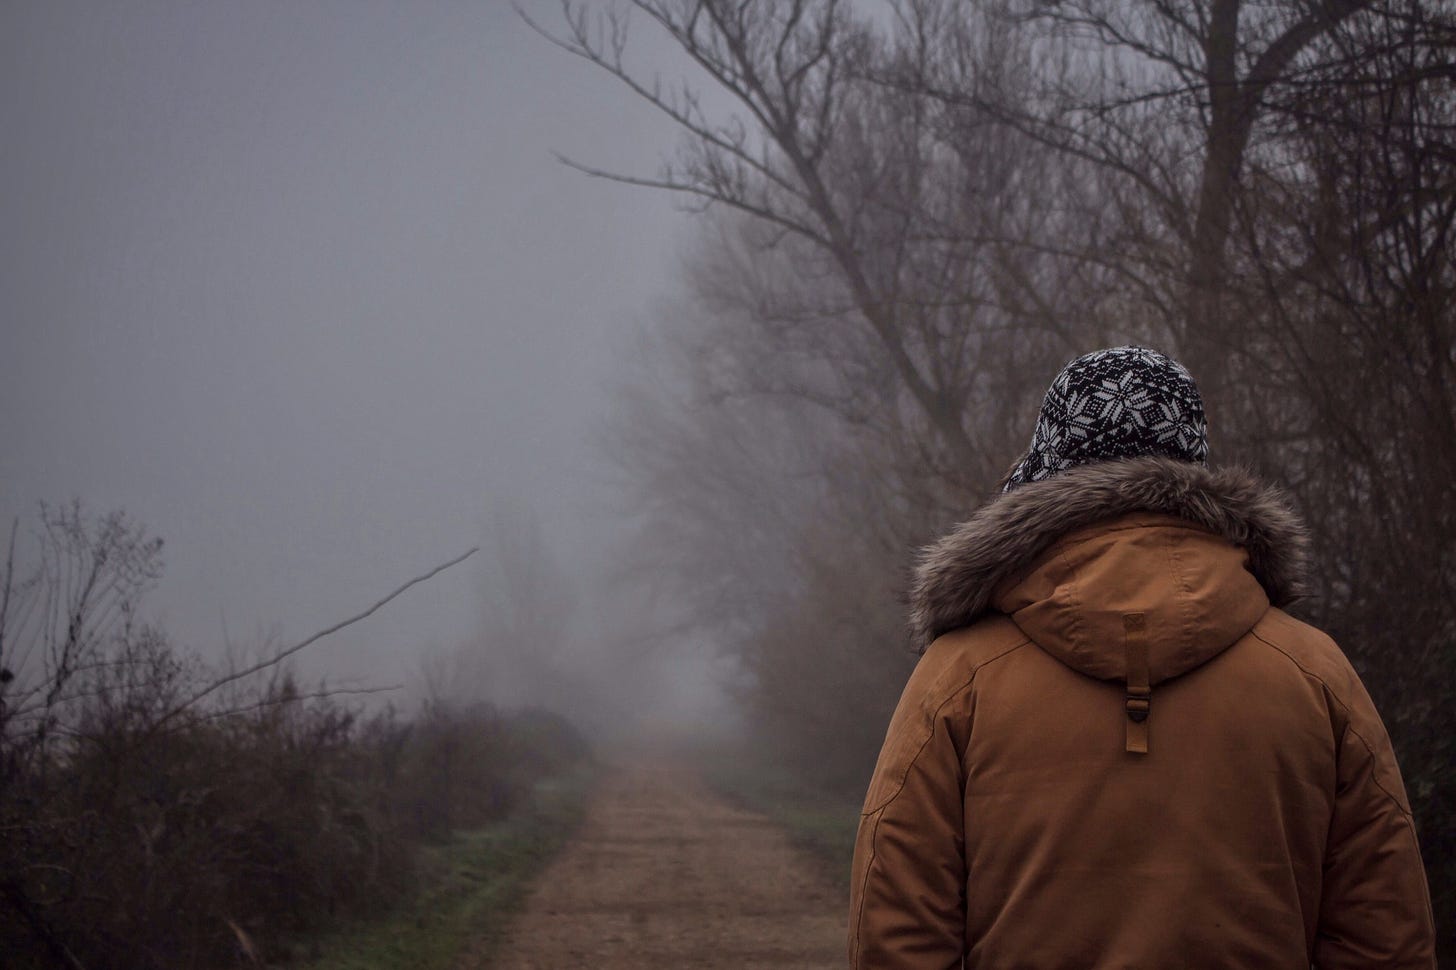 A person walks alone in the cold along a foggy country road.